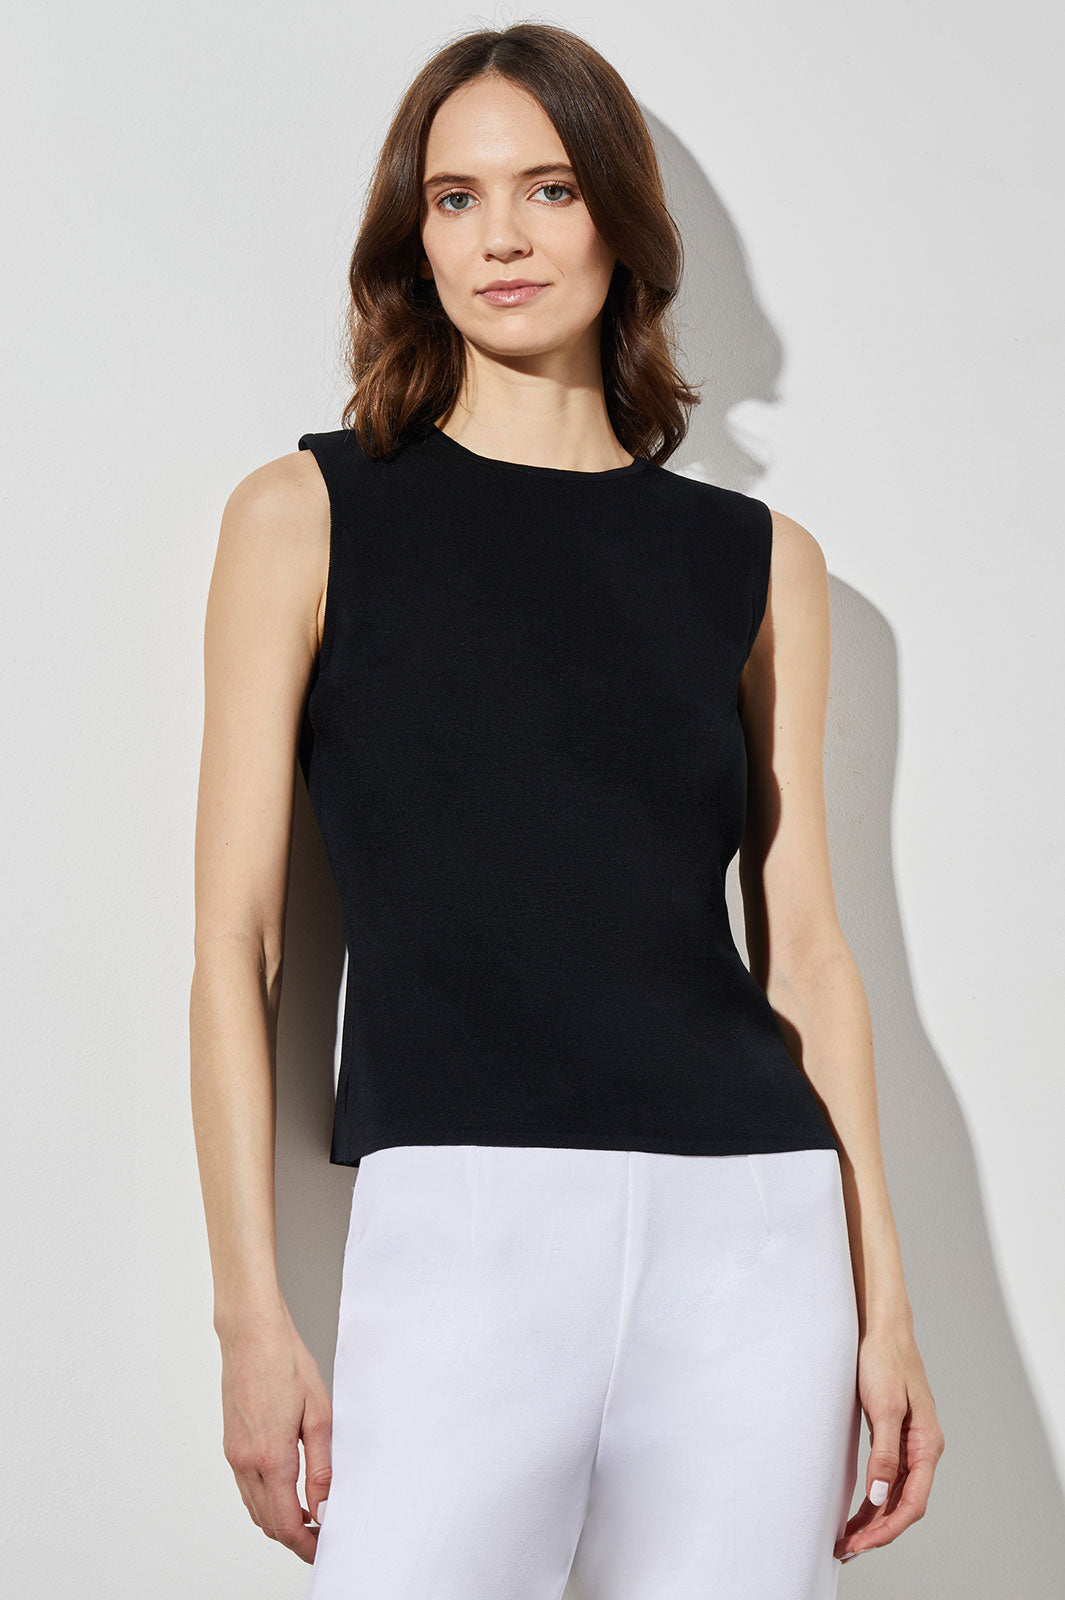 Women's Work Outfits - Wardrobe Essentials | Ming Wang Knits